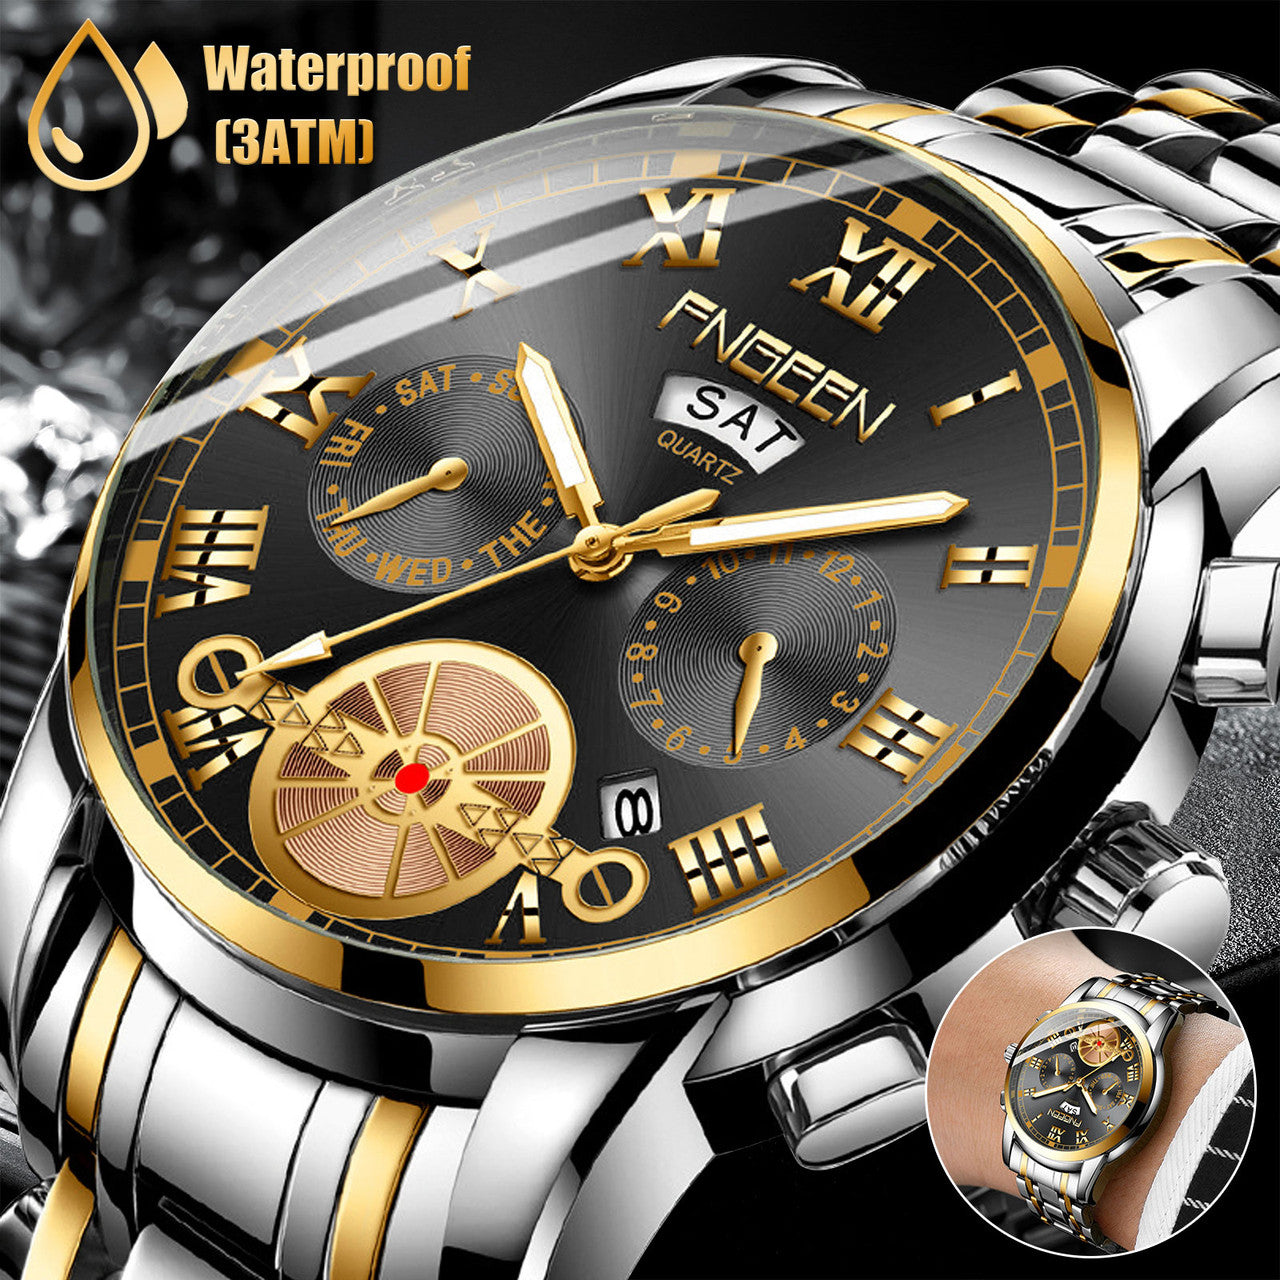 FNGEEN Men's Fashion and Waterproof Watch with Stainless Steel and Japanese Quartz Movement